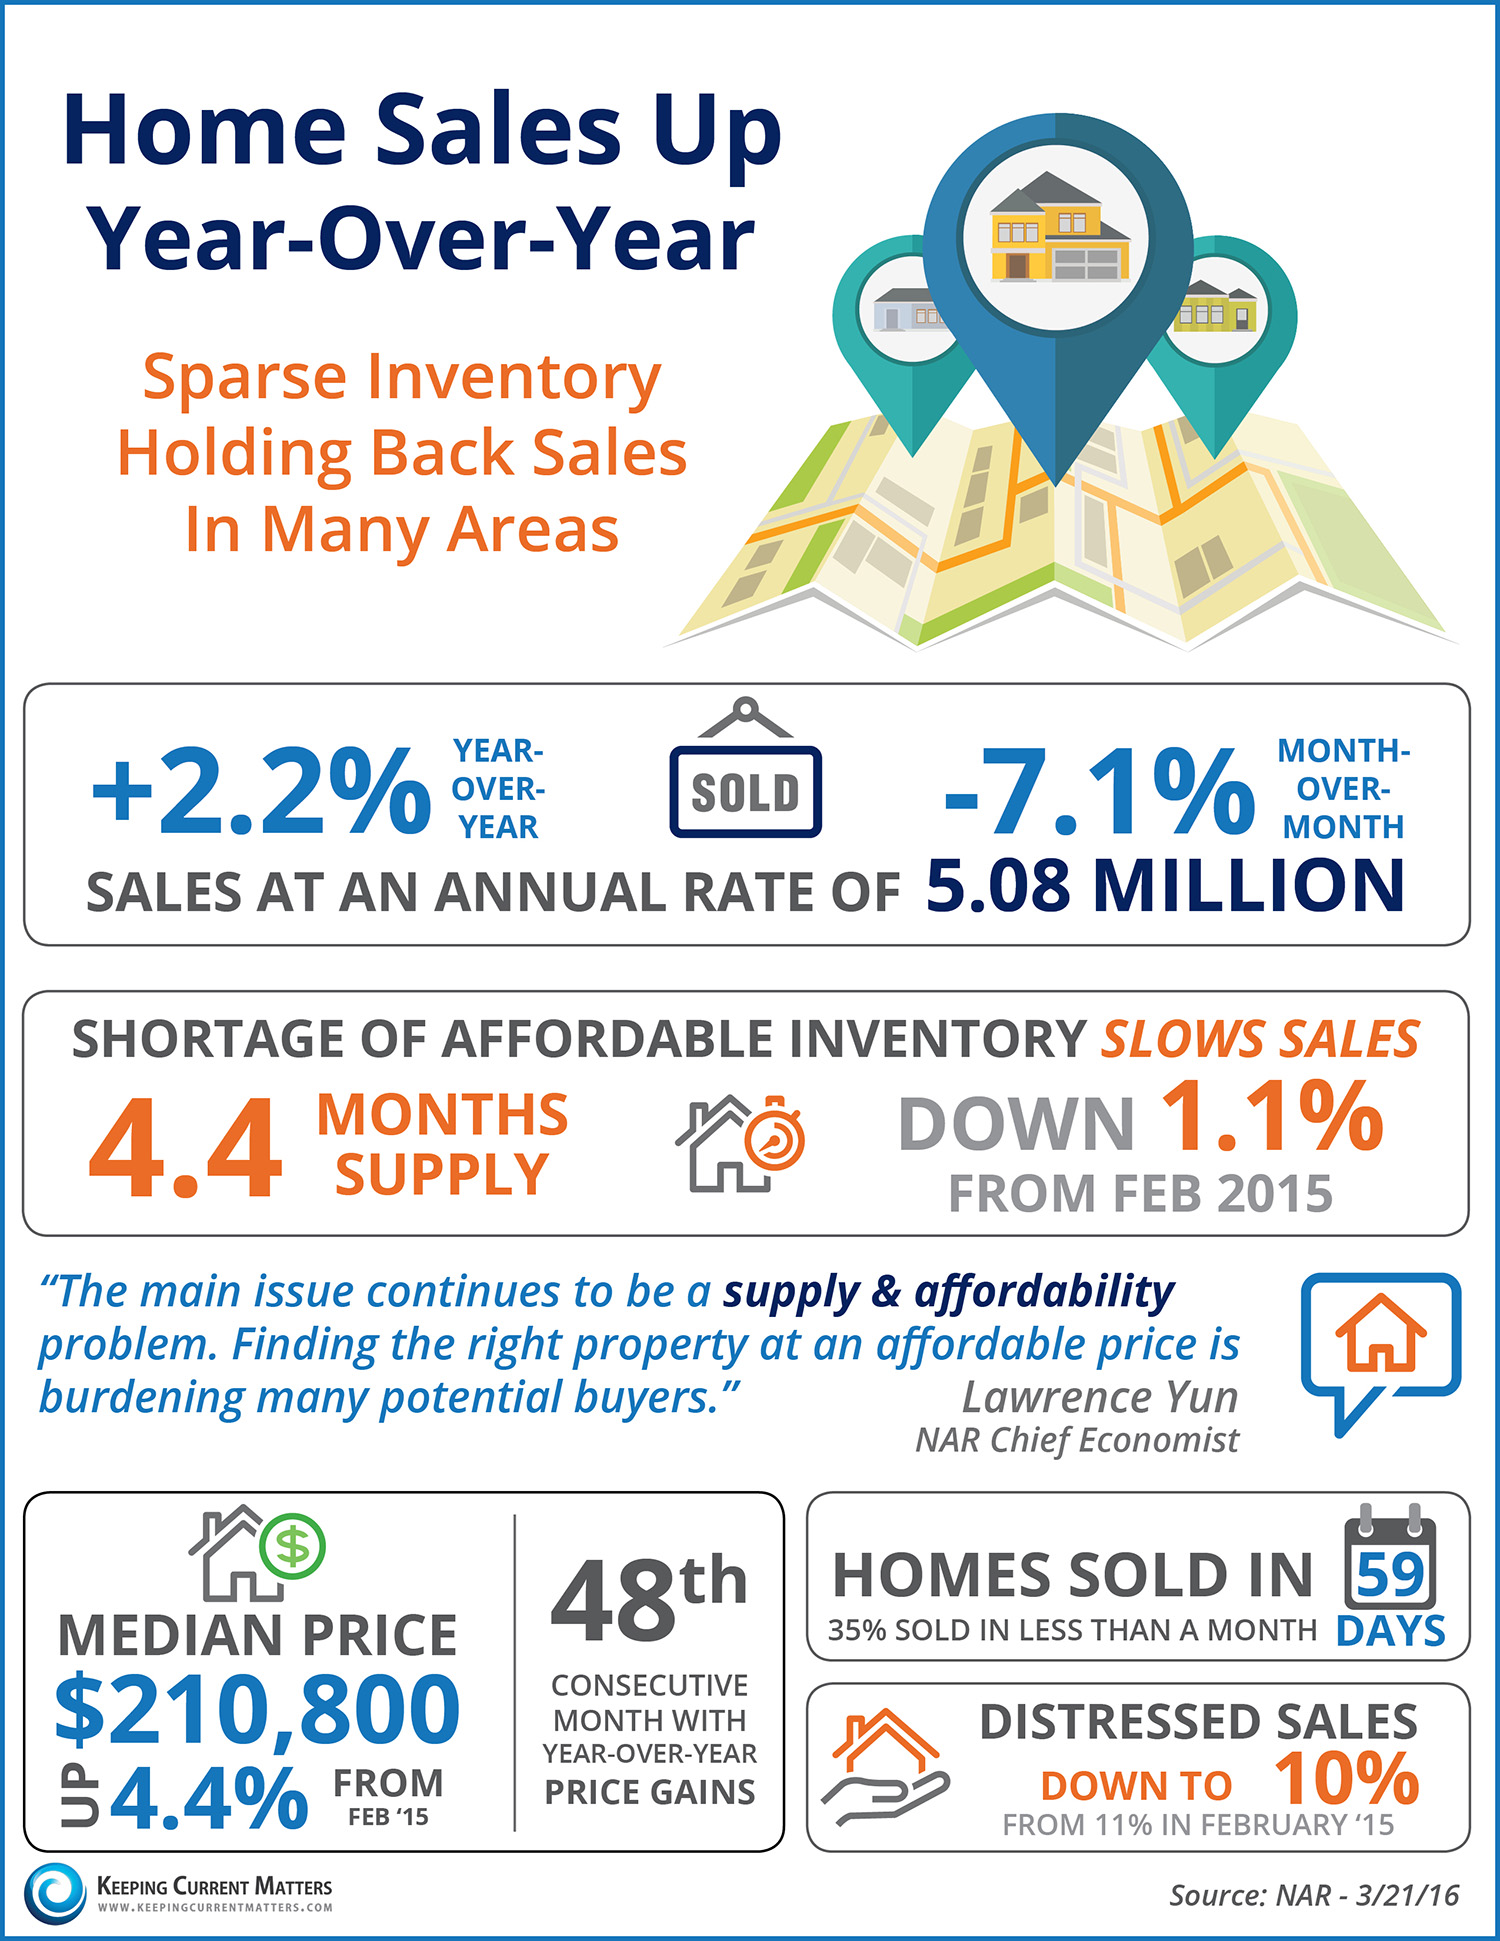 Home Sales Up Year-Over-Year | Keeping Current Matters